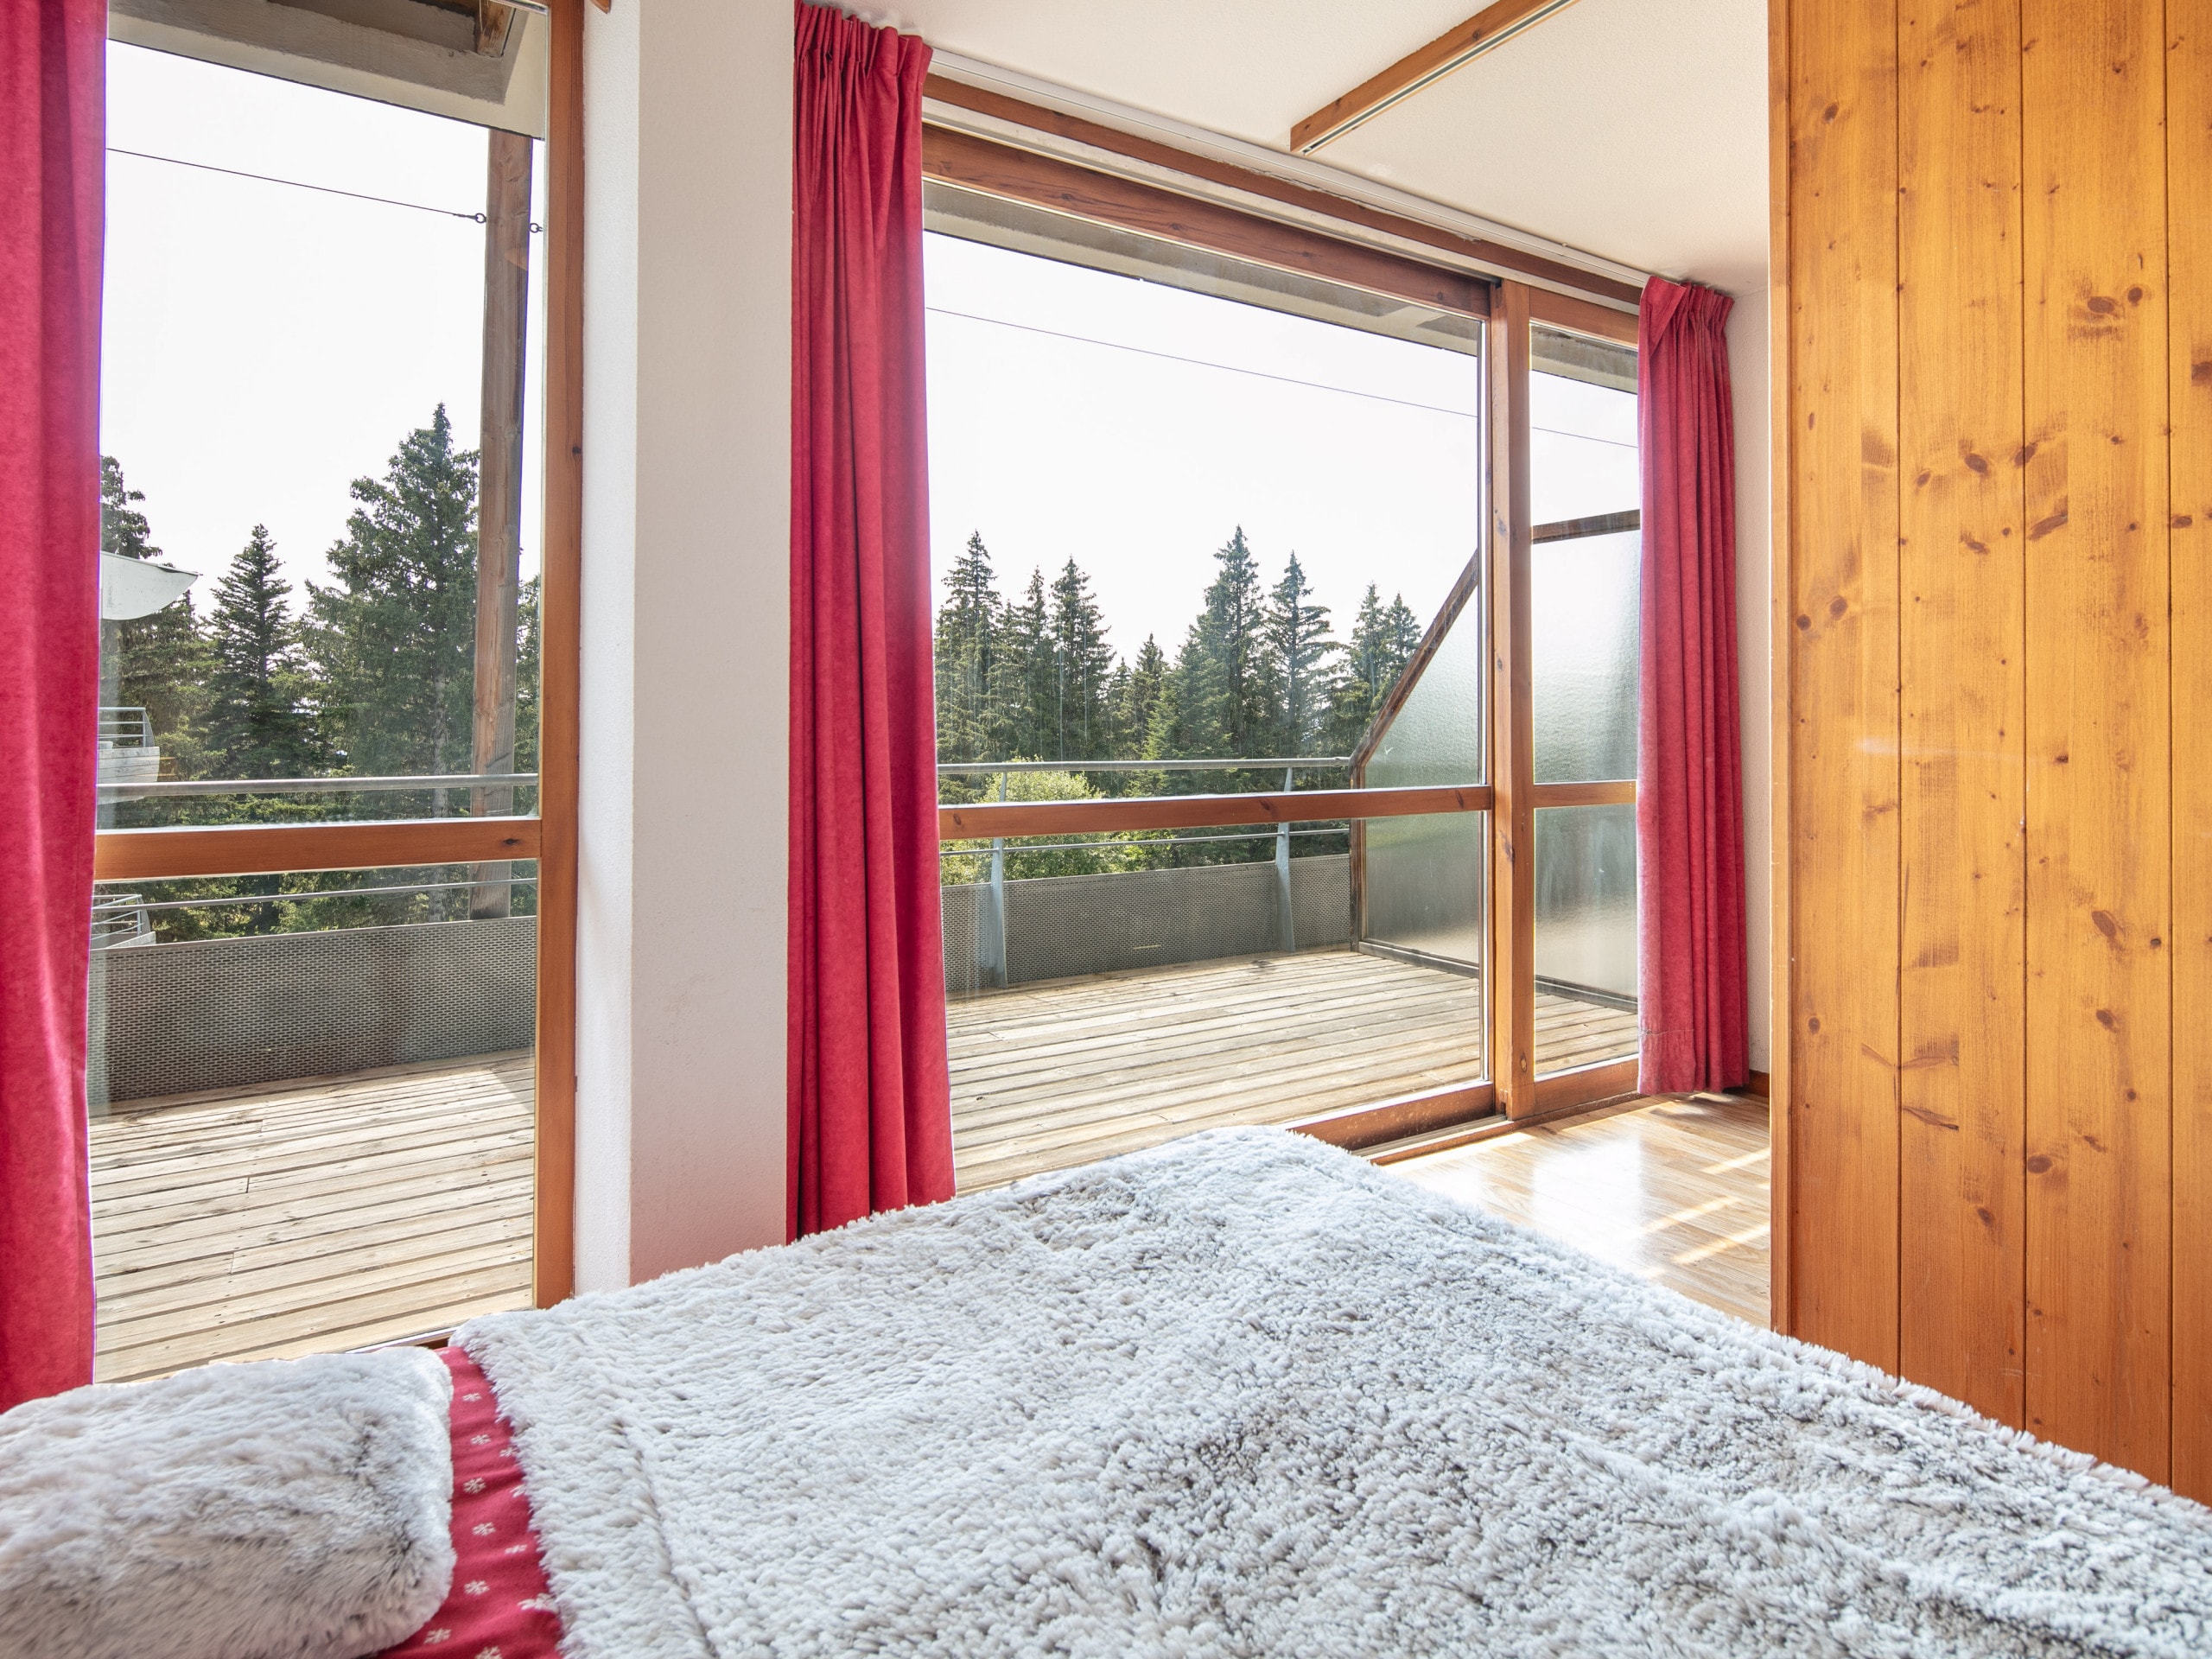 Studio 6 persons mountain view - Studio V du Bachat - JOUBARBES A15 - Appt terrasse 6 pers - Chamrousse